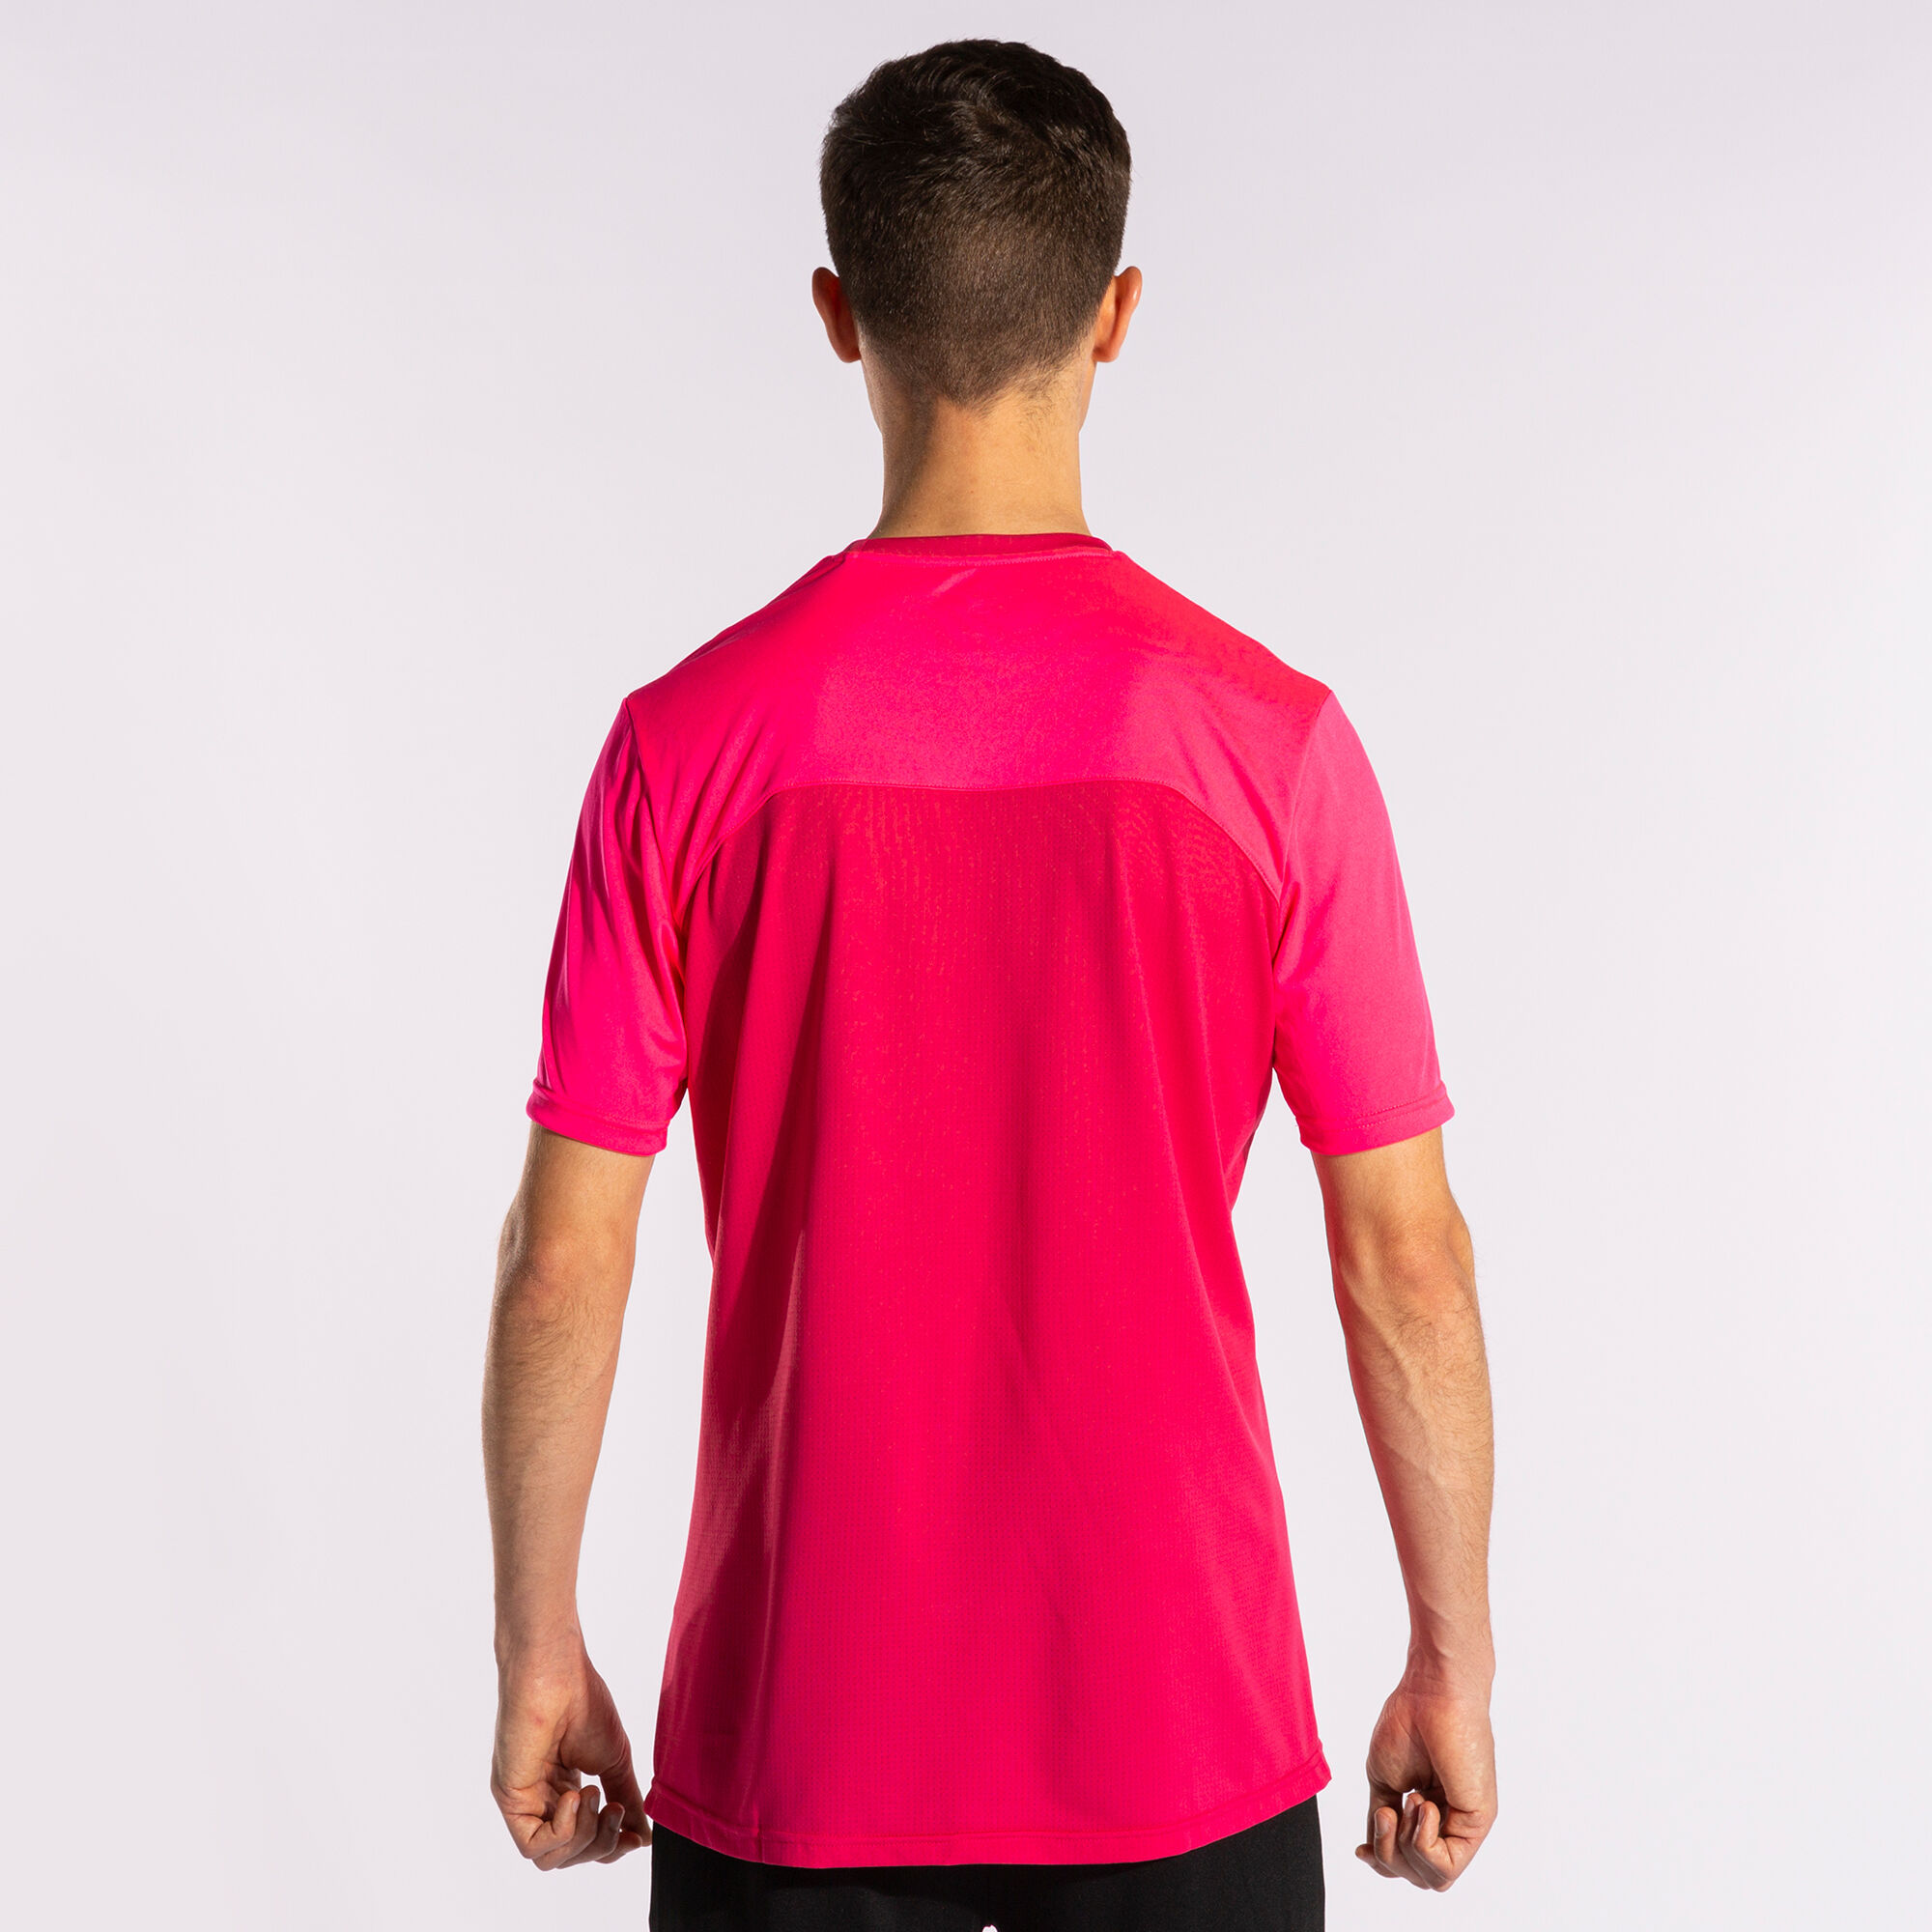 MAILLOT MANCHES COURTES HOMME WINNER II ROSE FLUO